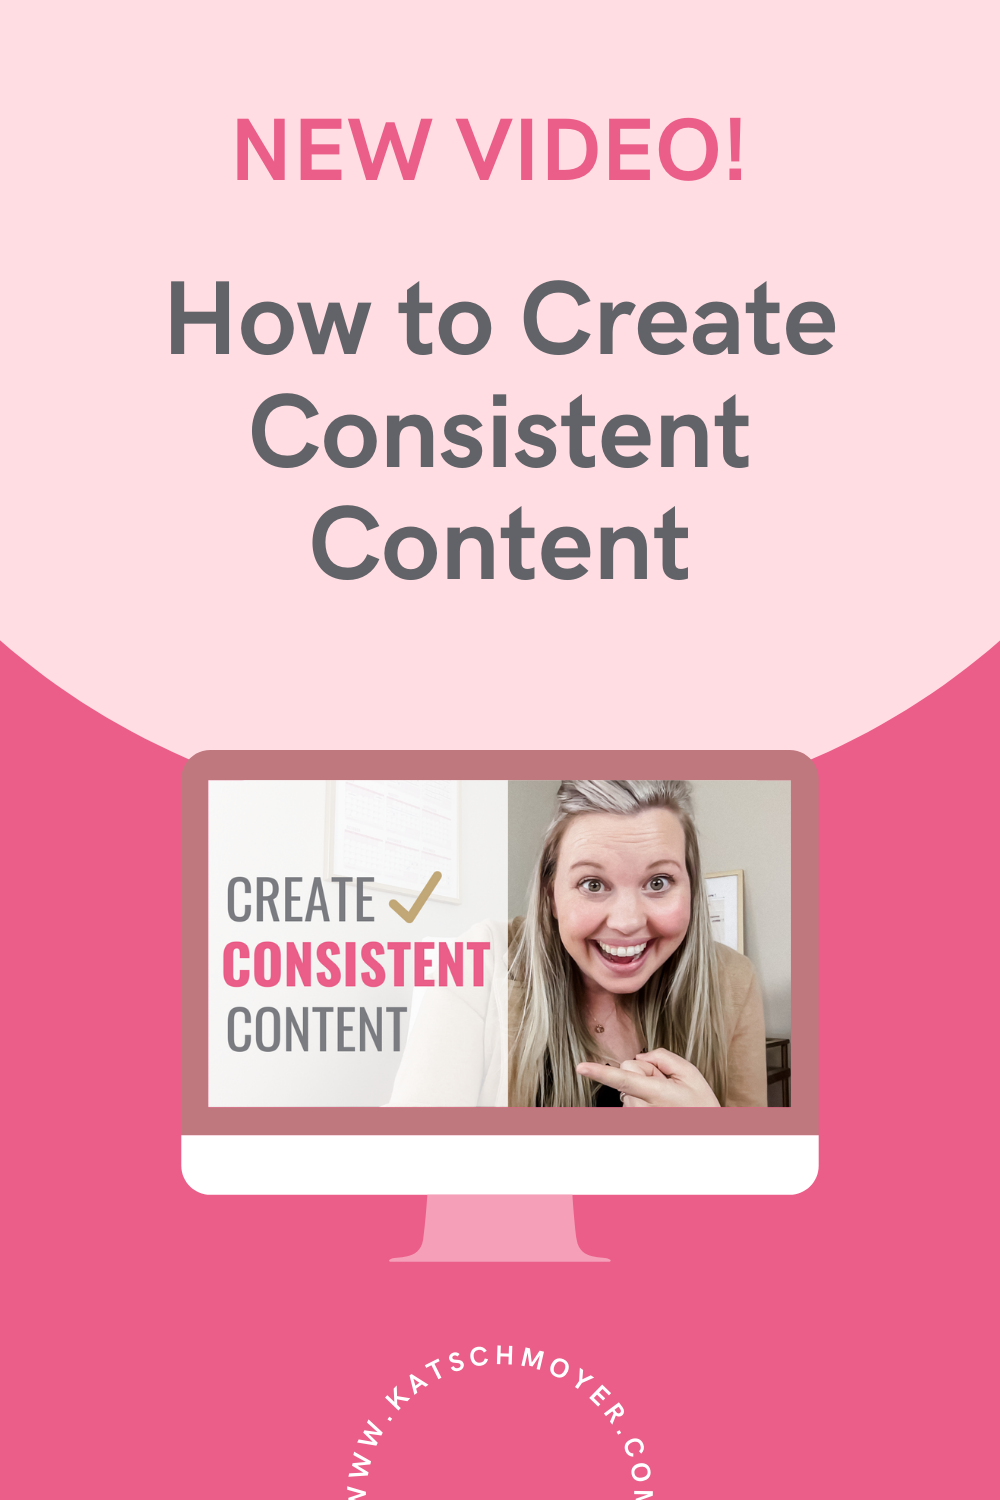 How to Create Consistent Content